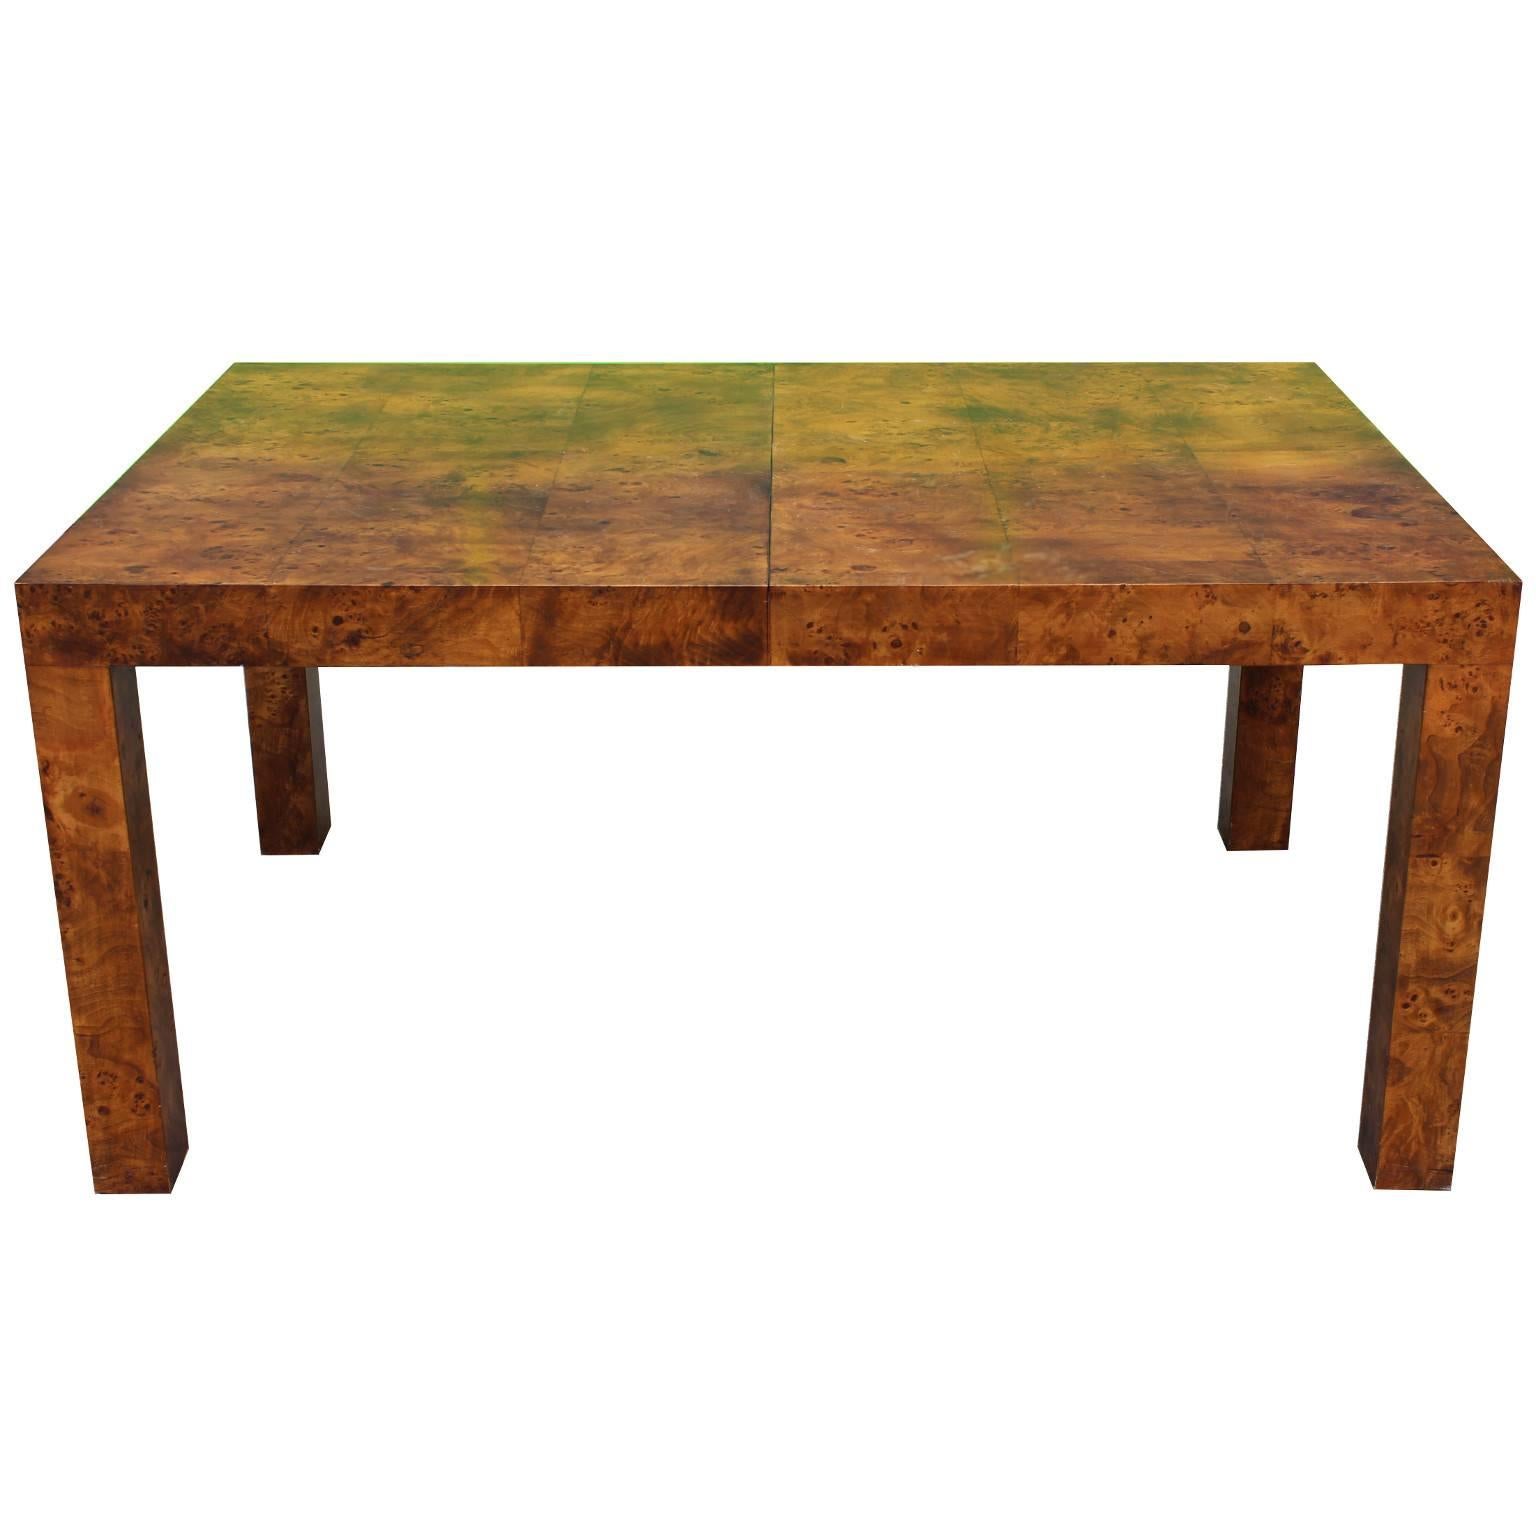 Milo Baughman Parsons Dining Table in Deep Burl for Lane